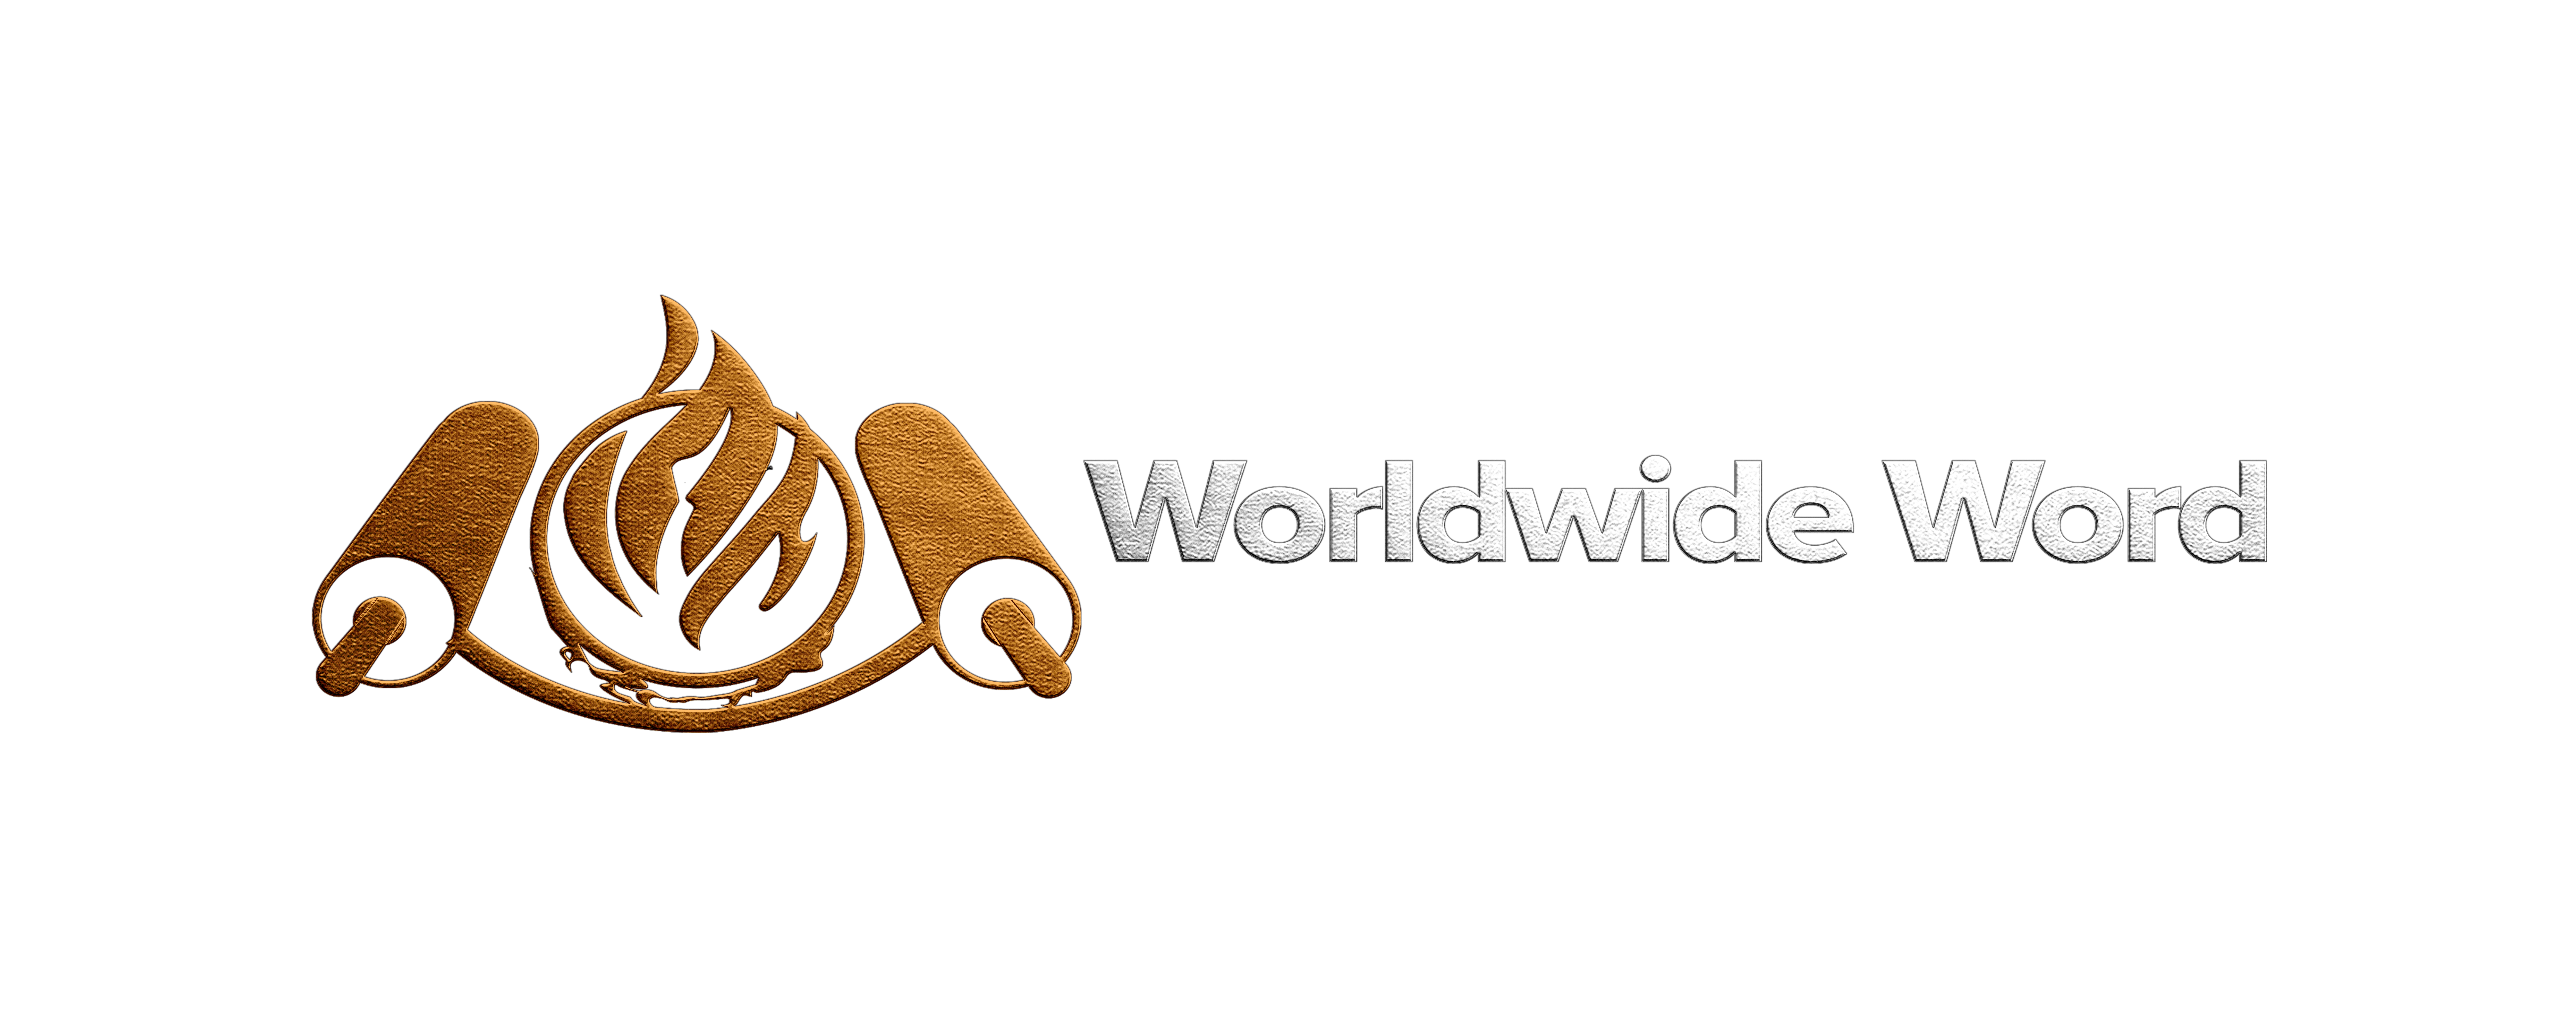 Worldwide Word Ministries- Ancaster, Ontario